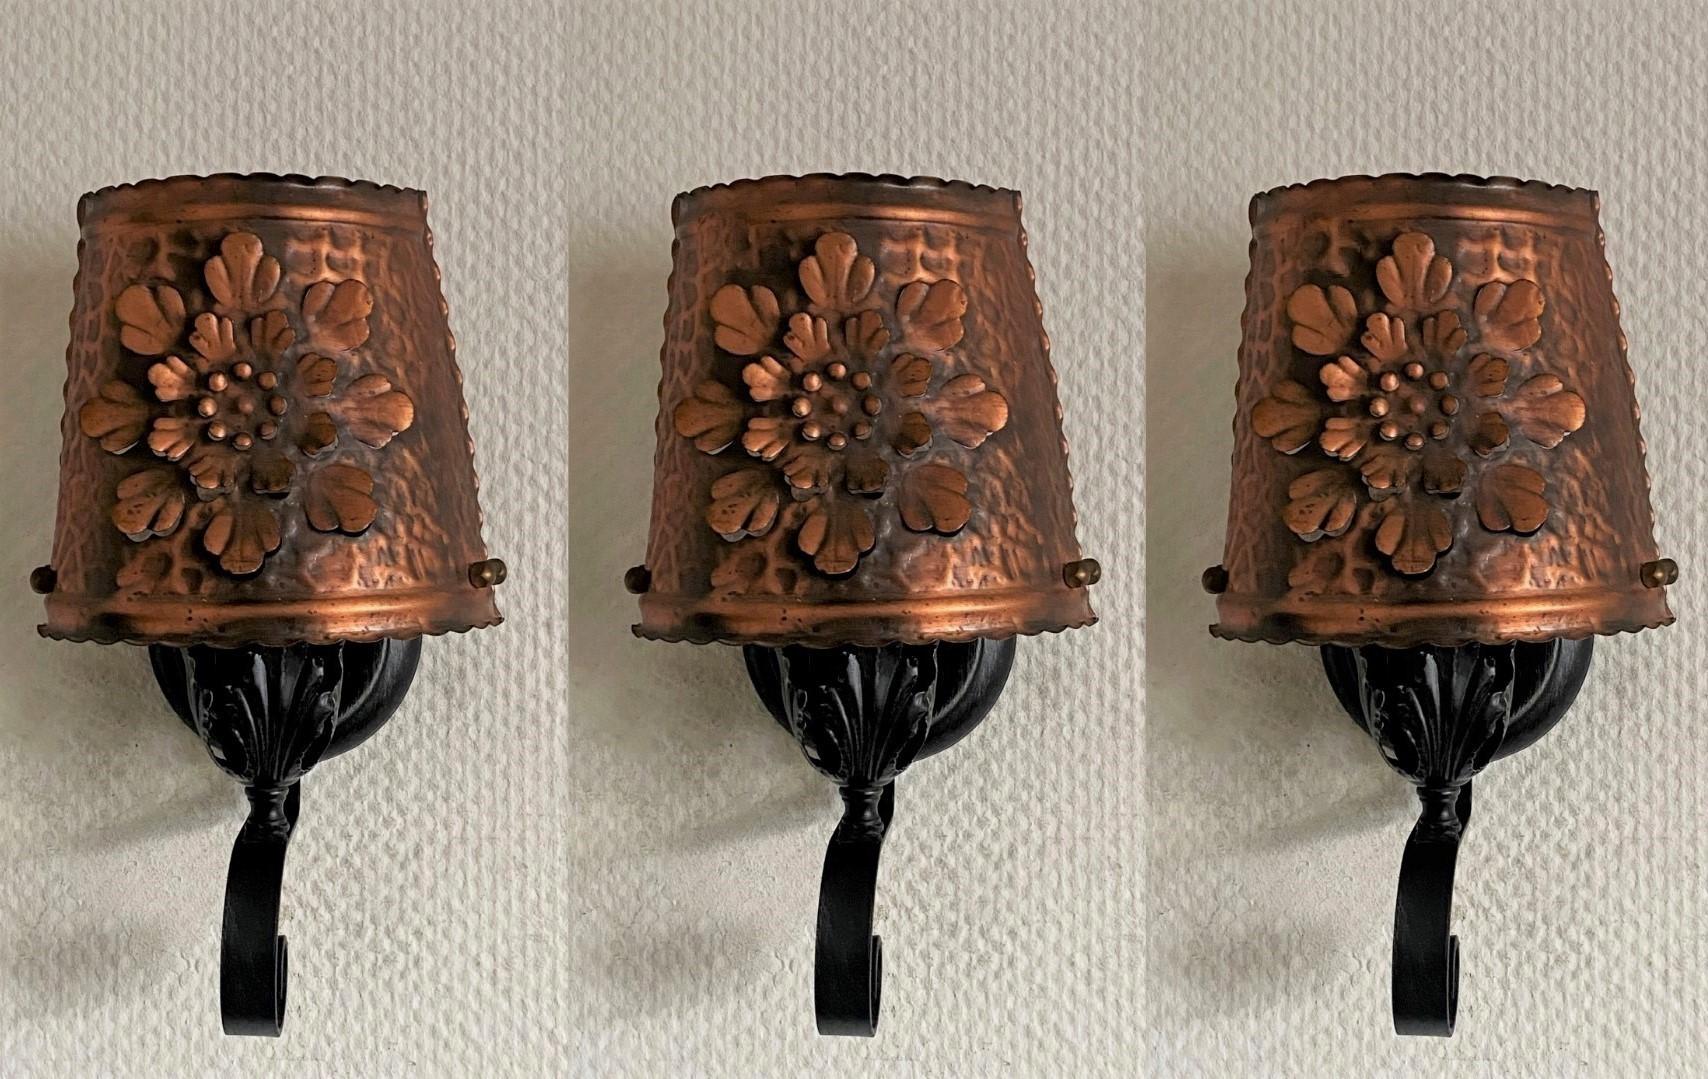 A set of three craftsman style wrought iron wall sconces with hand-hammered copper detailing, pierced details on the shades for light projection, Spain, 1950s. All 3 pieces in very good condition, with aged patina and rewired. Each sconce takes one